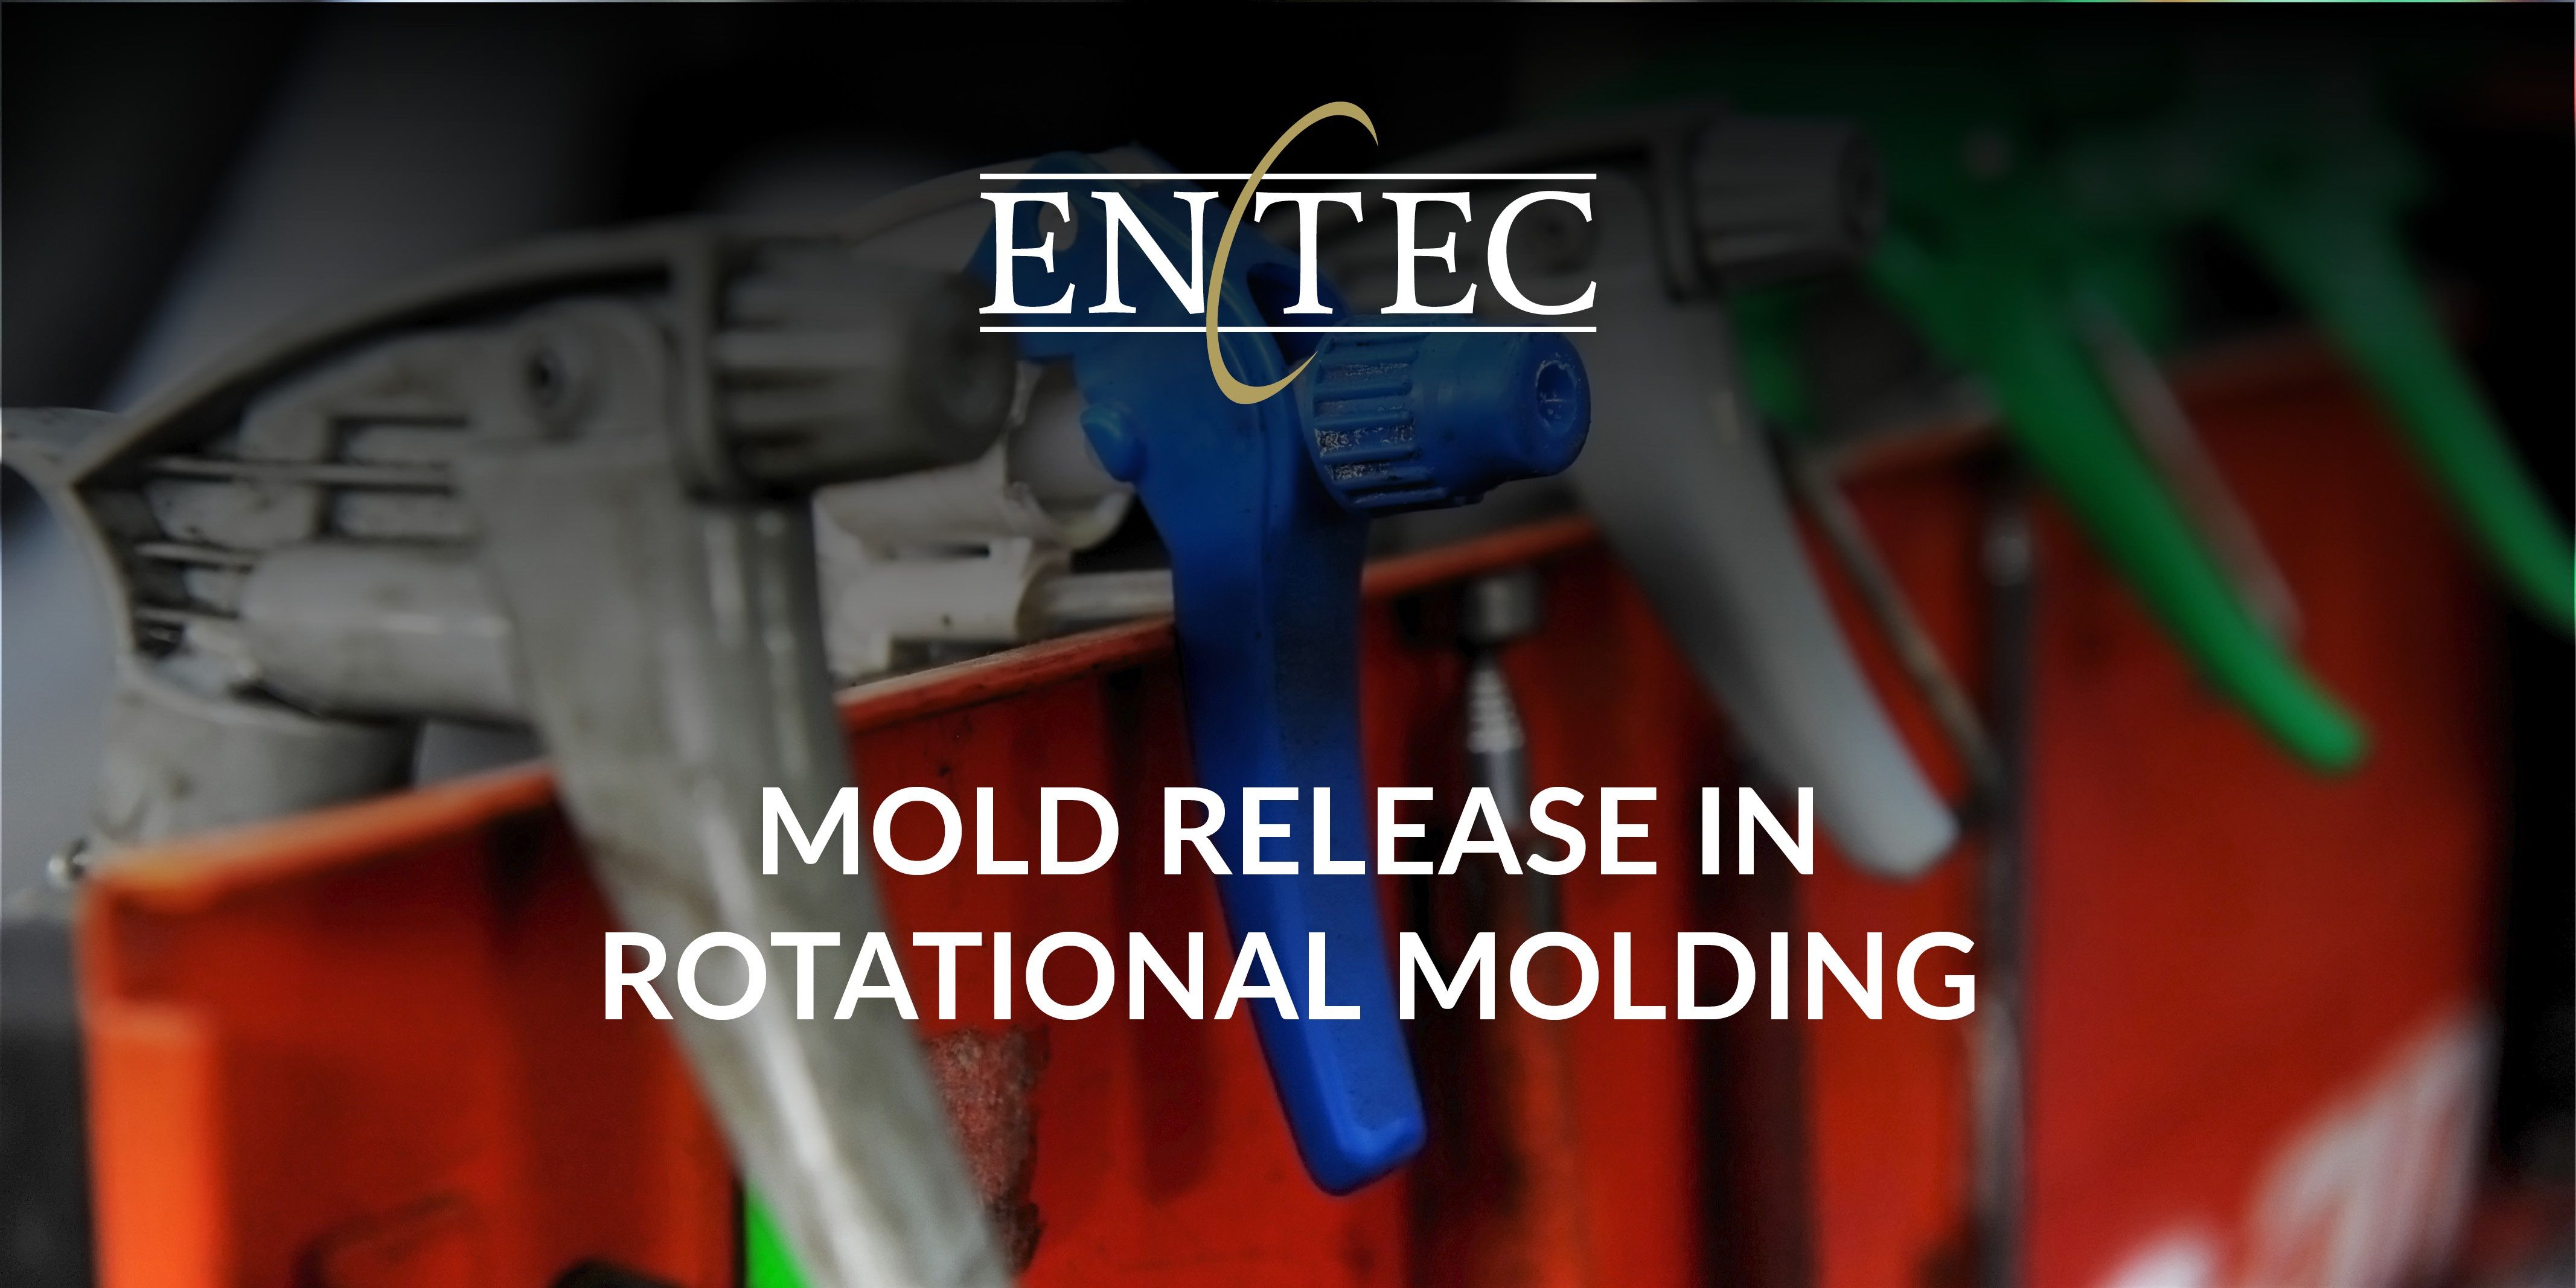 Mold Release in Rotational Molding Social Media Post